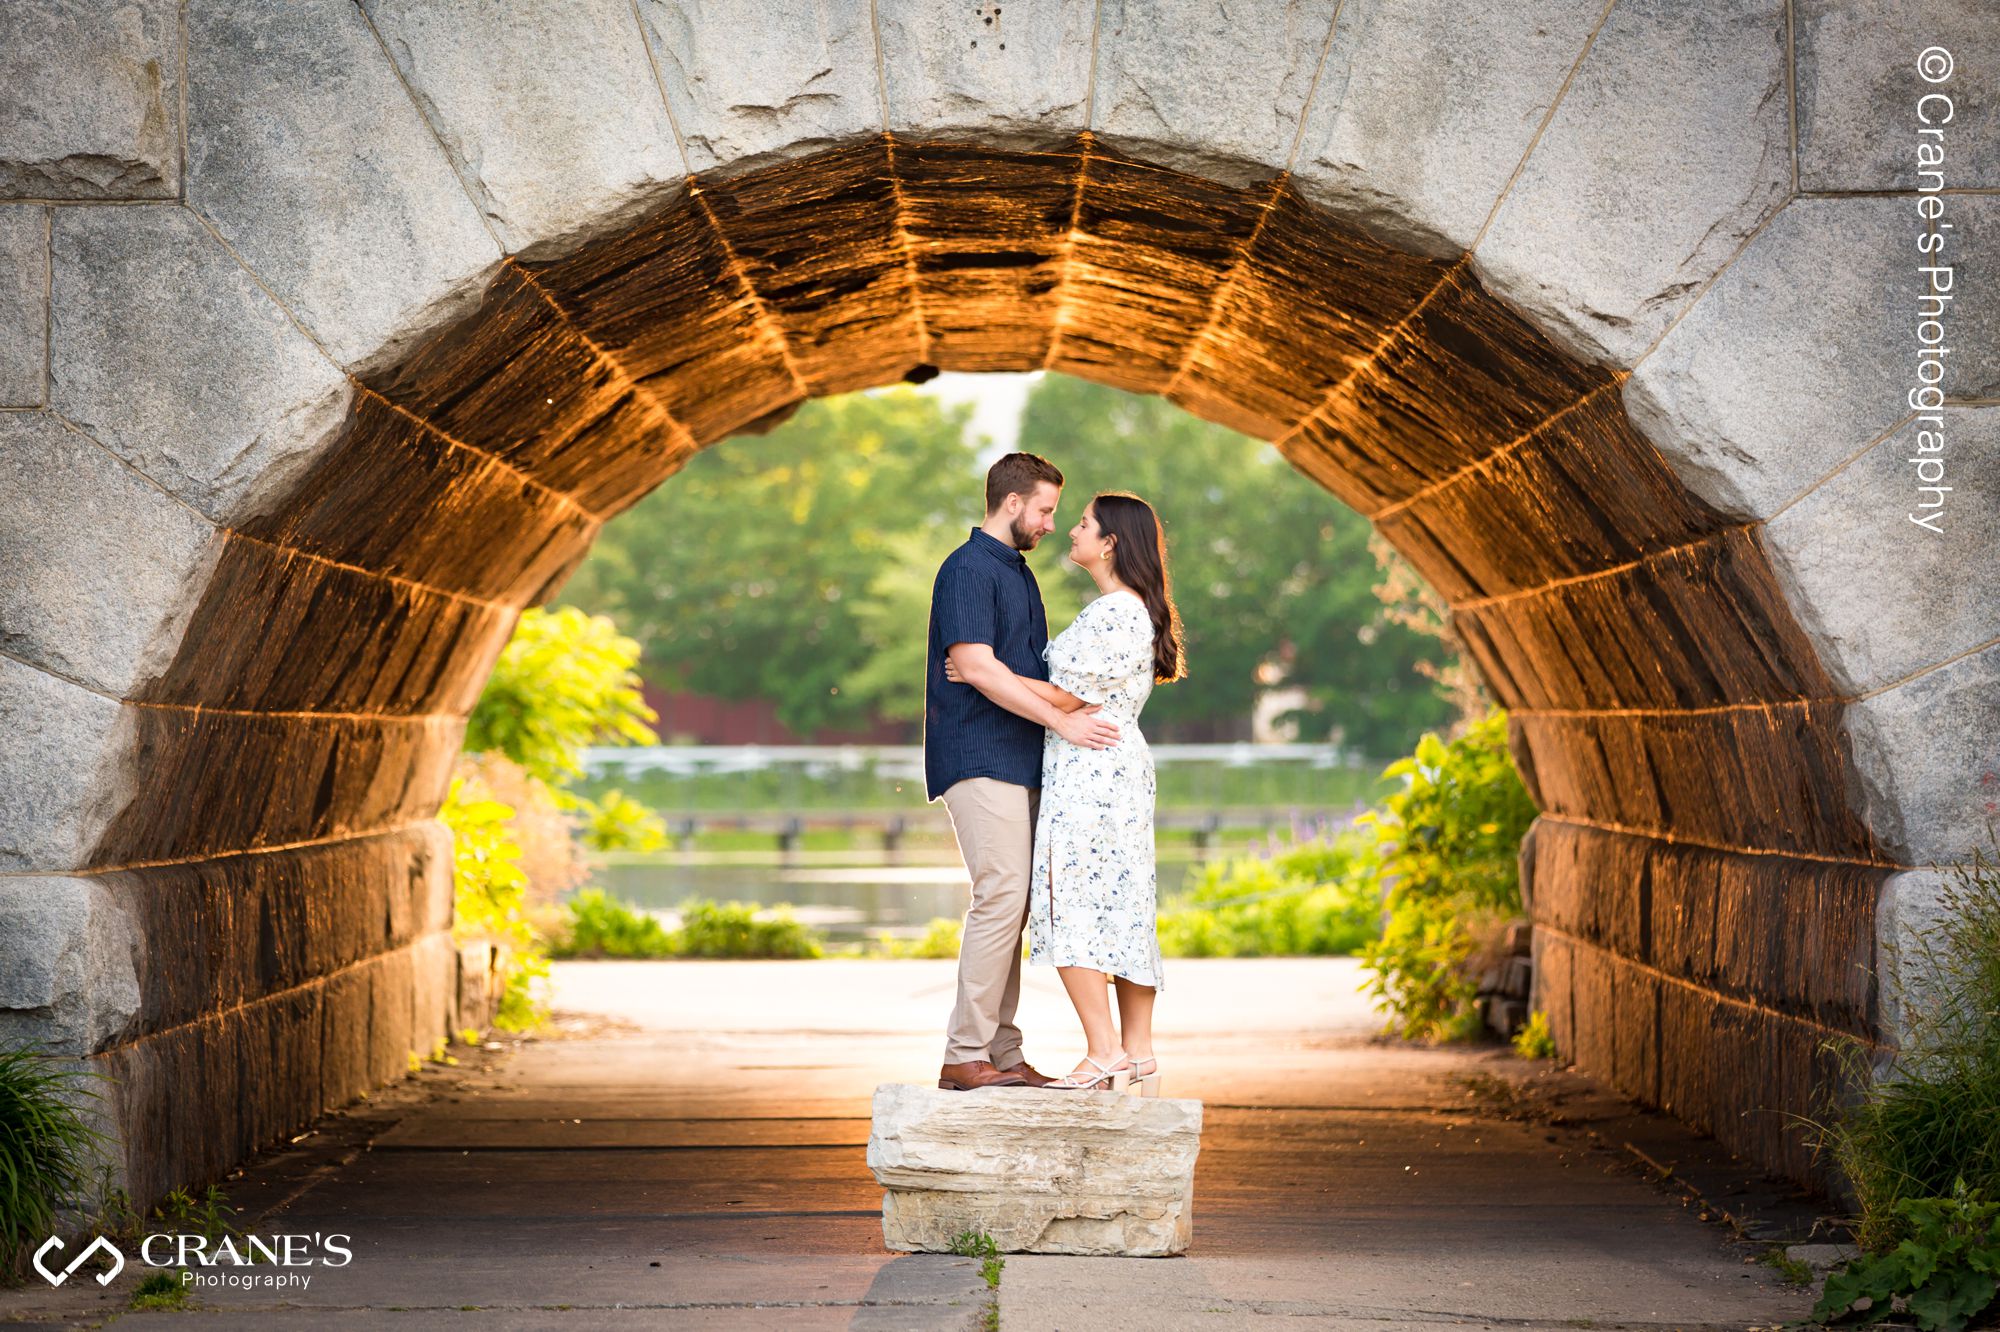 An engagement session photo at Lincoln Park at sunset